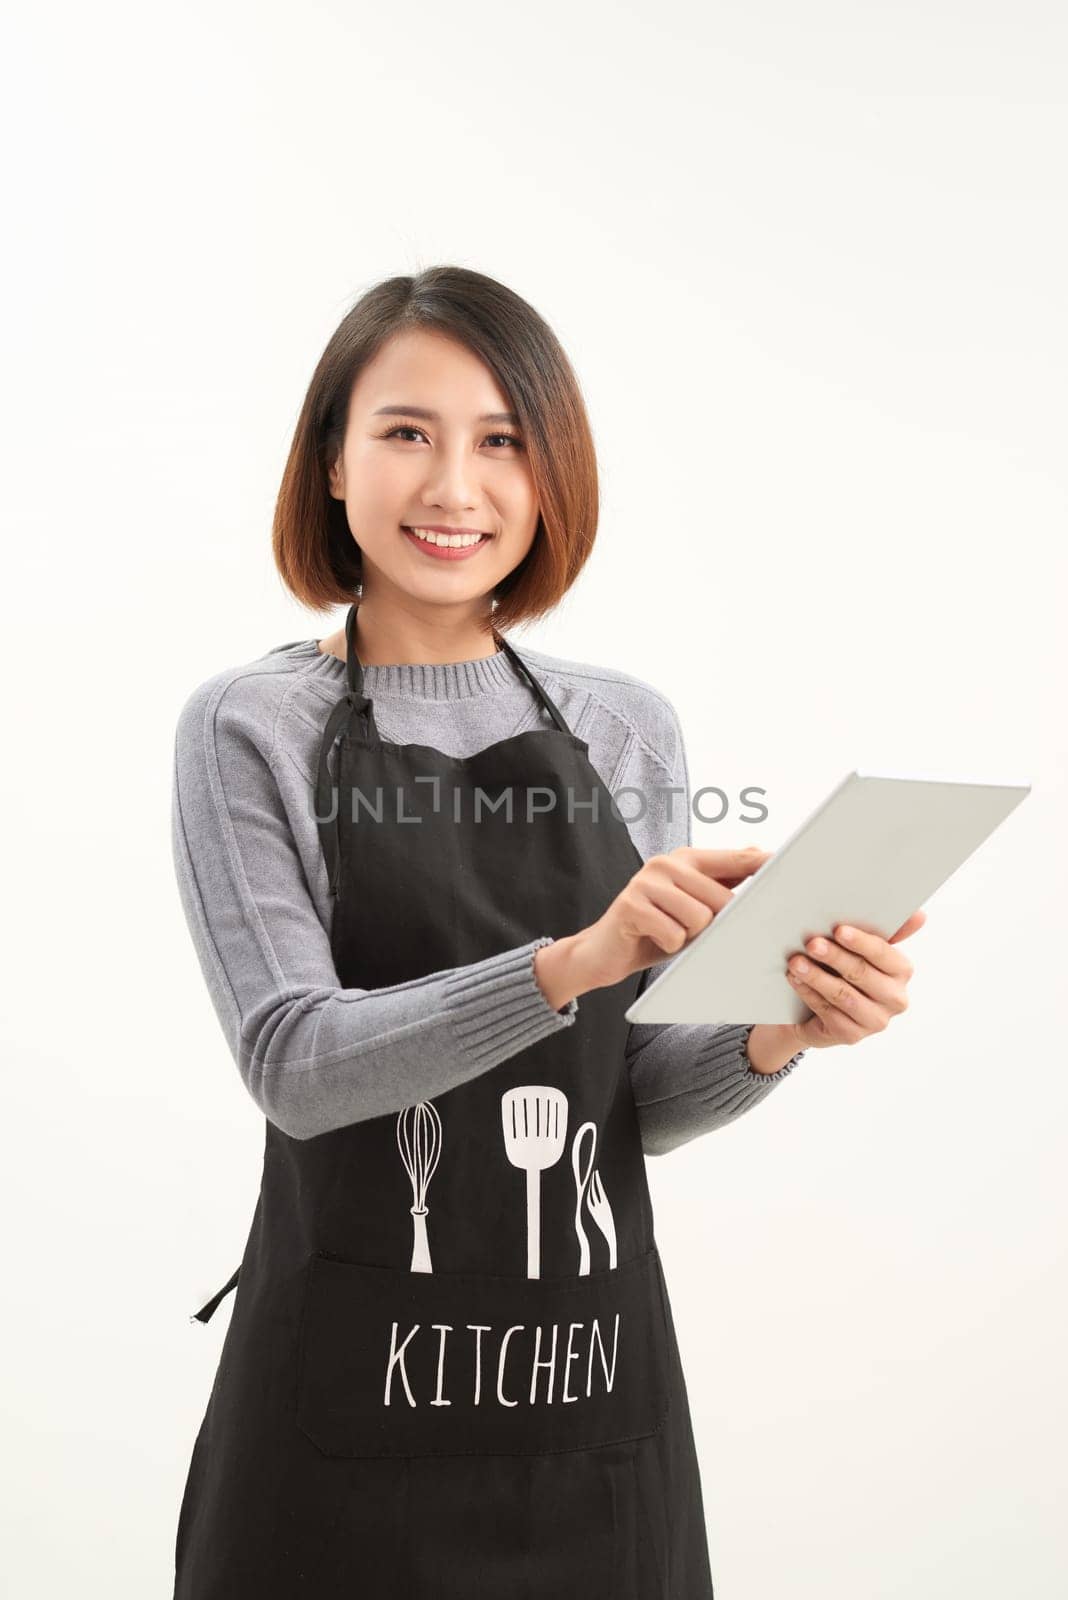 Successful hypermarket employee with black apron holding modern tablet isolated on white background with copyspace by makidotvn